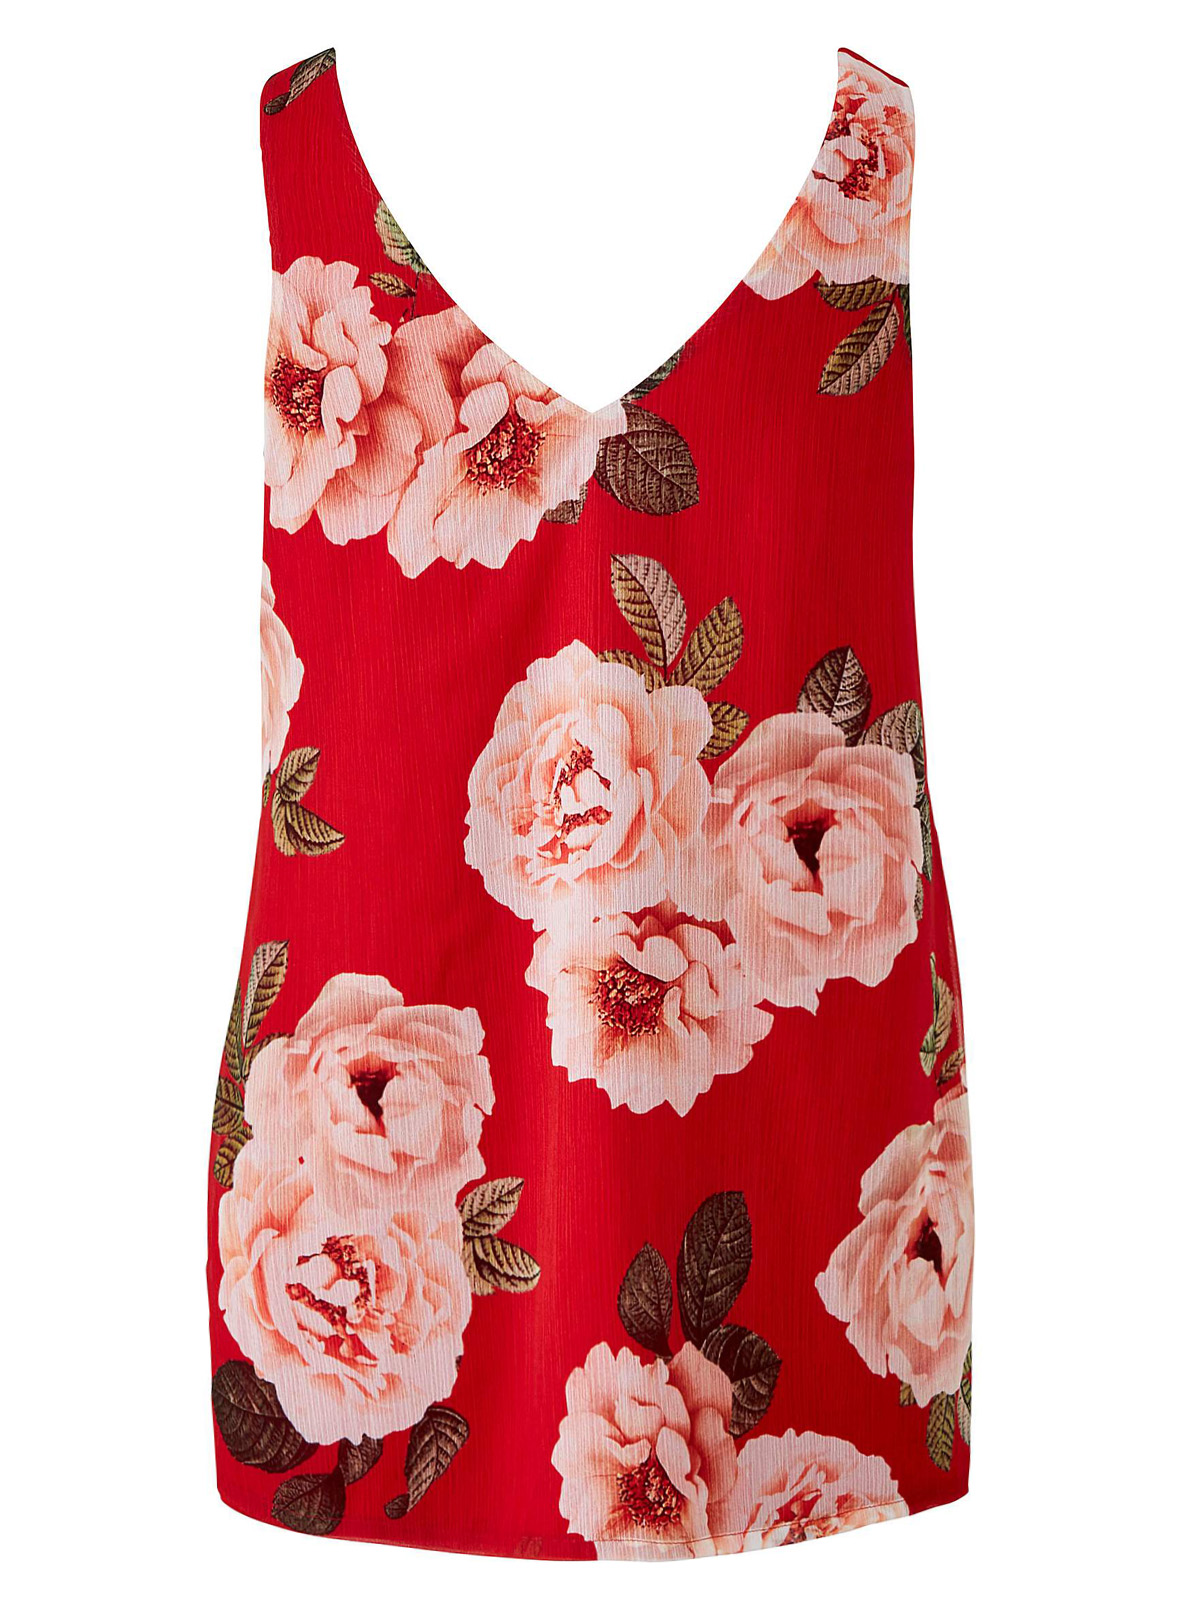 Joanna Hope - - Joanna Hope RED Floral Print Vest Top - Plus Size 16 to 26